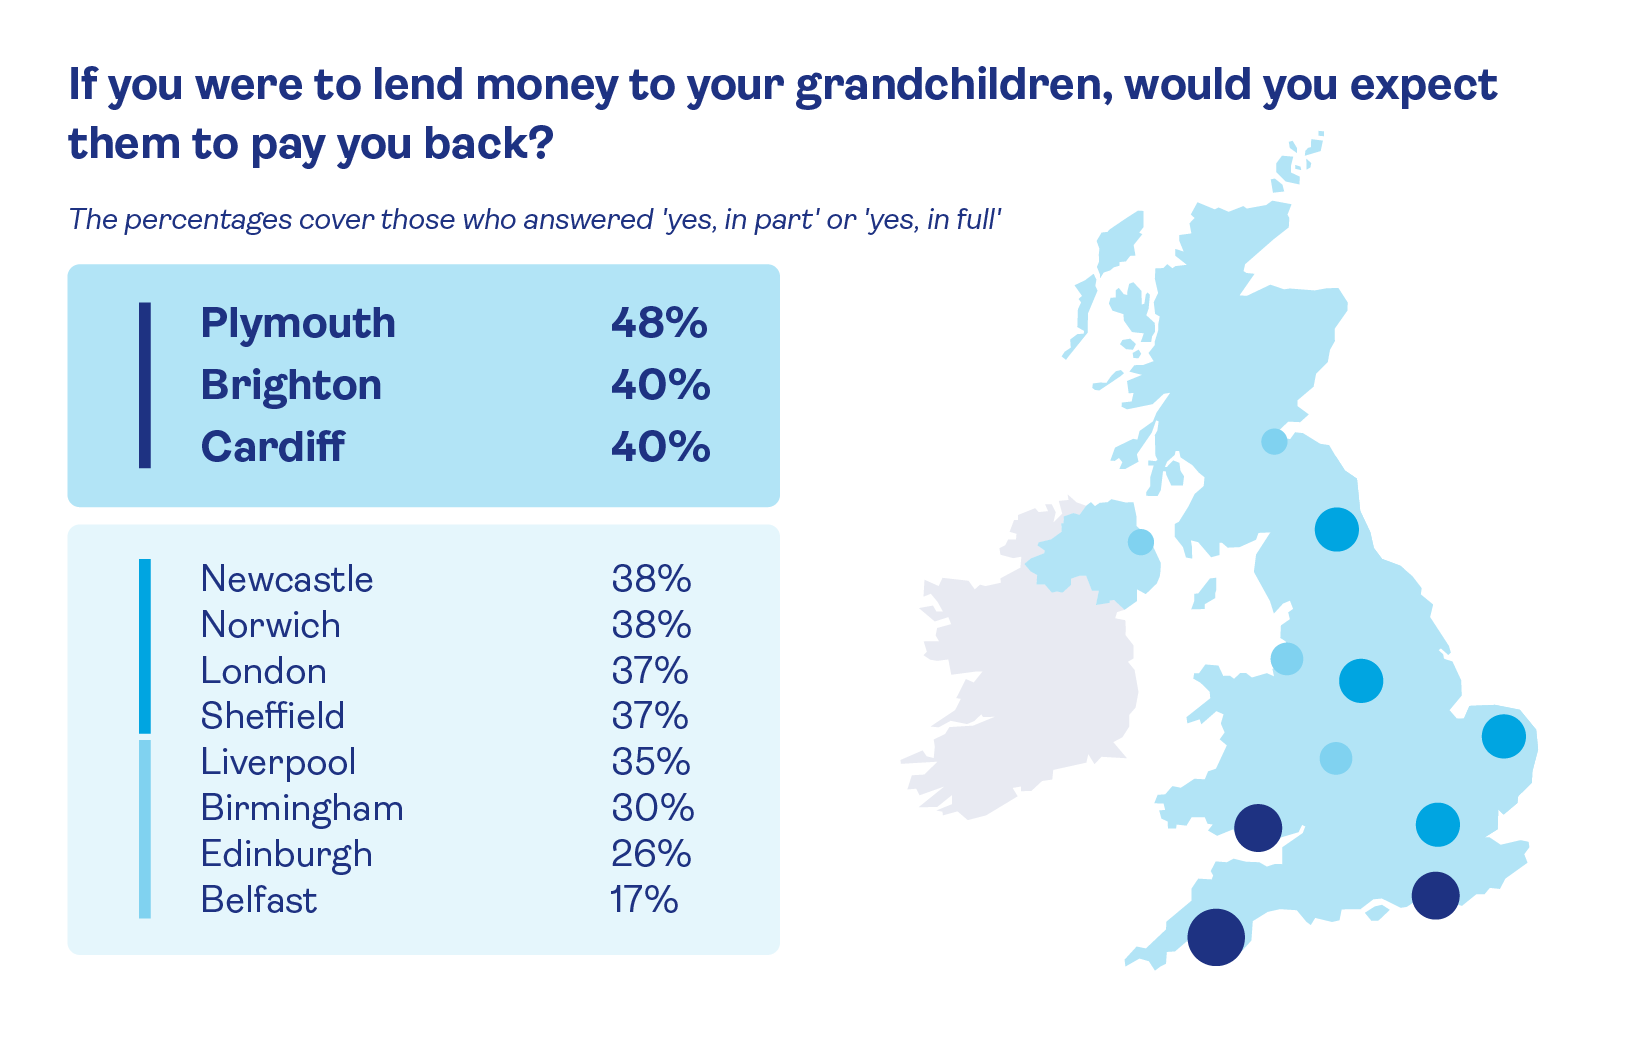 Map of the UK showing areas where grandchildren would be expected to pay back a loan from their grandparents